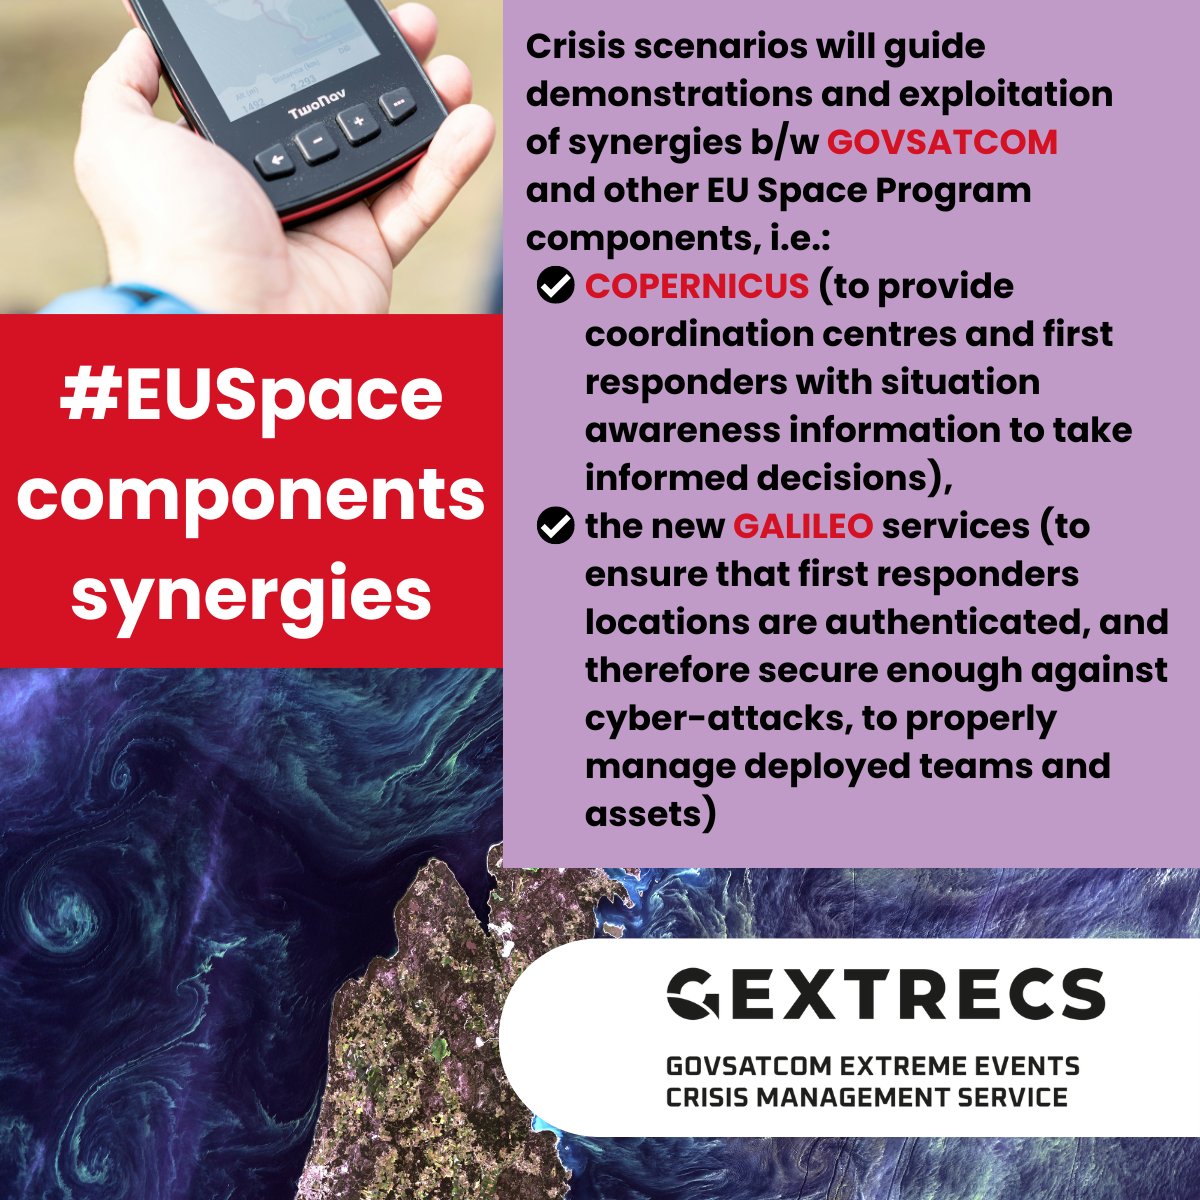 🔄Synergies b/w #Copernicus #EO & #Galileo #GNSS have already shown efficiencies, but synergies of these 🇪🇺#EUSpace components w/ #GOVSATCOM are far of being demonstrated yet. Highlighting these synergies through demo scenarios is #GEXTRECS priority⏬
#HorizonEU #crisismanagement